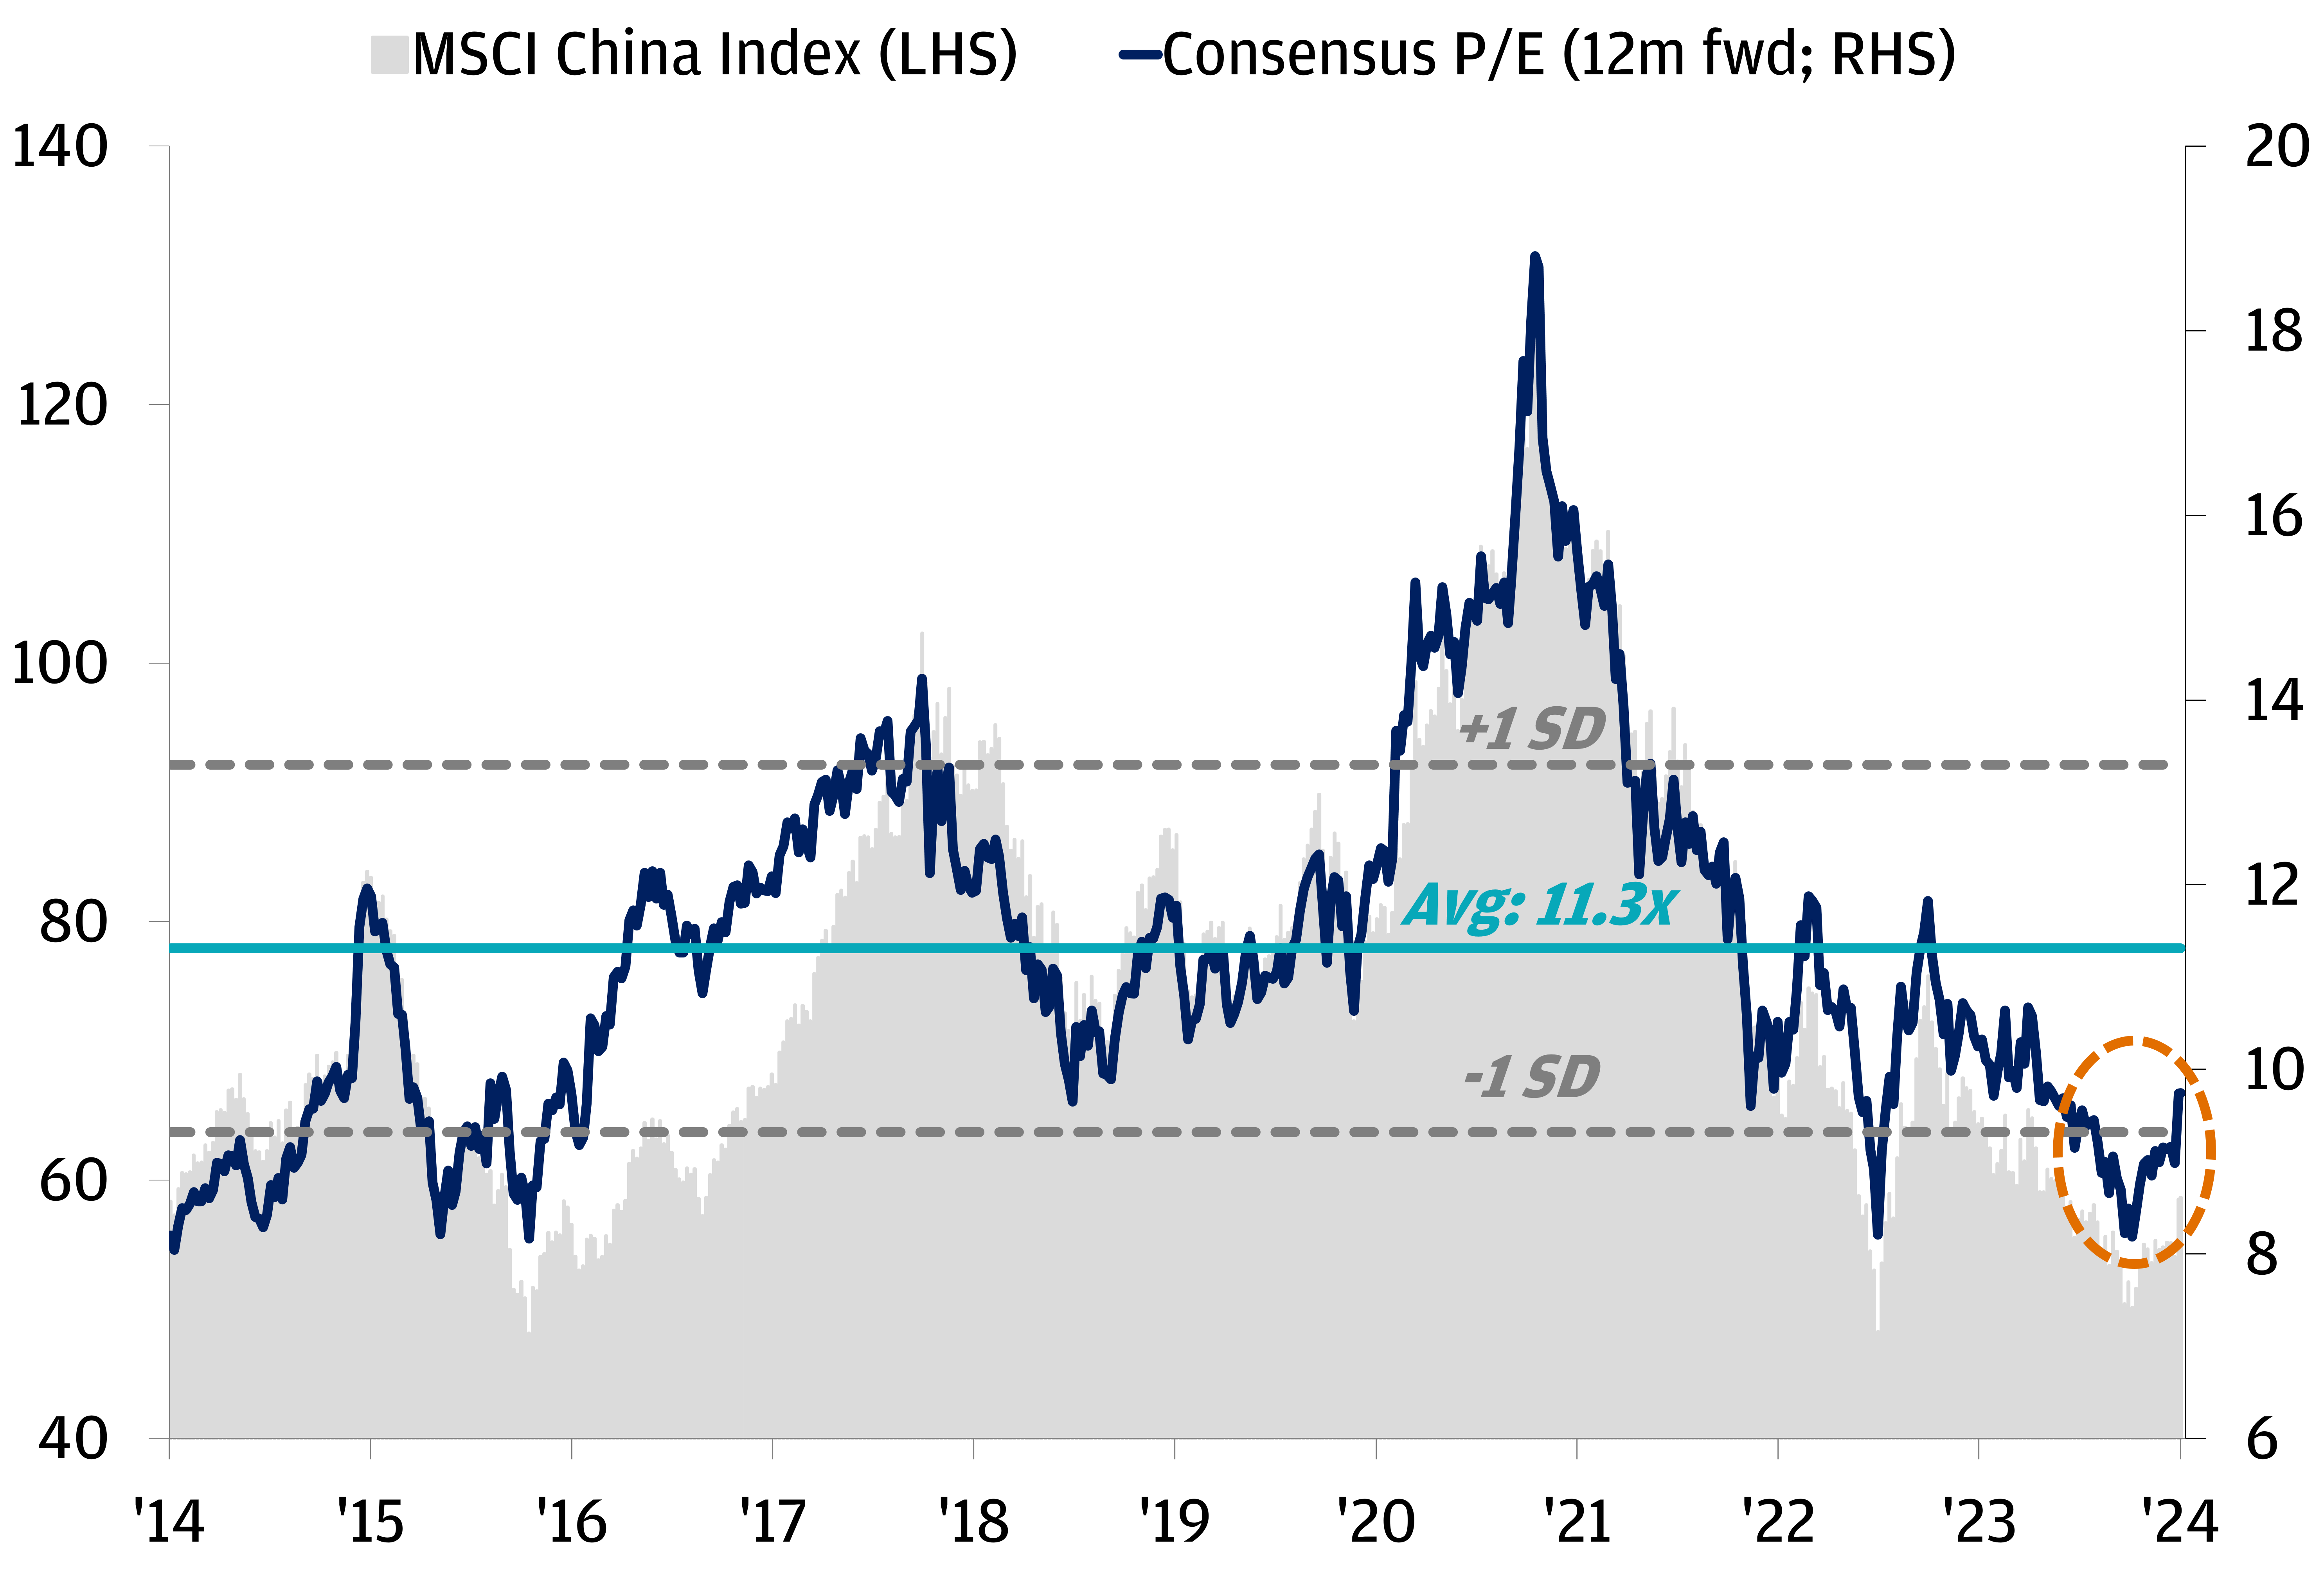 CHINA EQUITY VALUATIONS NO LONGER LOOK DISTRESSED